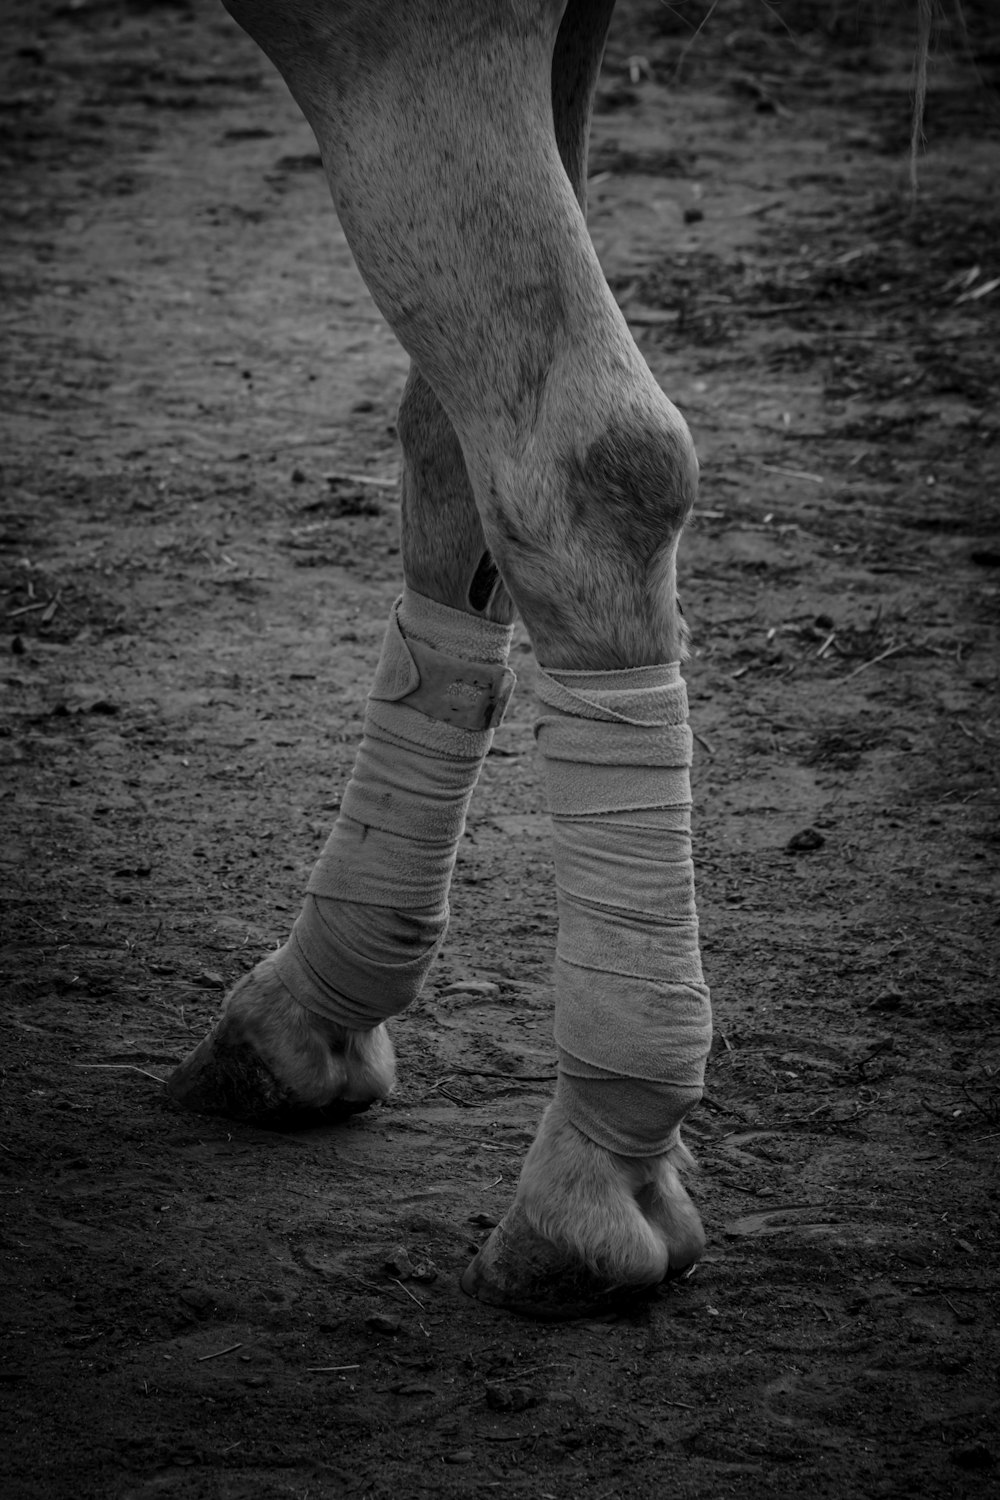 a black and white photo of a horse's leg with bandages on it